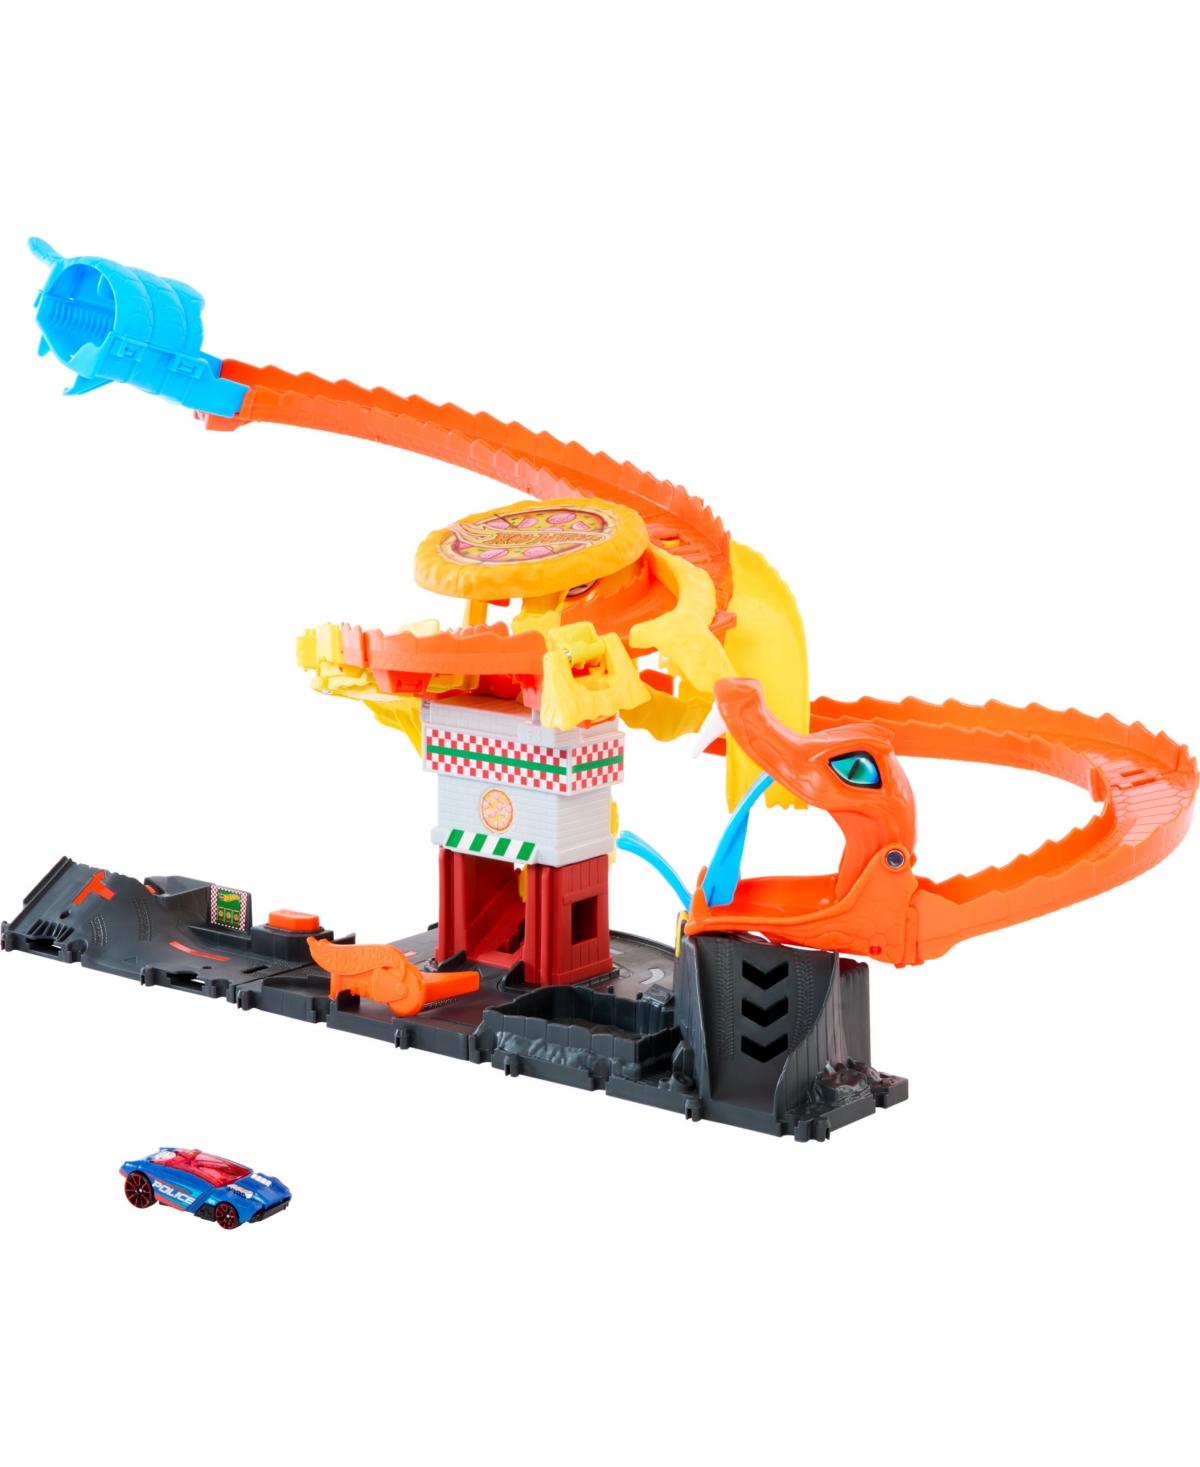 Shop Hot Wheels City Pizza Slam Cobra Attack Playset With 1:64 Scale Toy Car In Multicolor